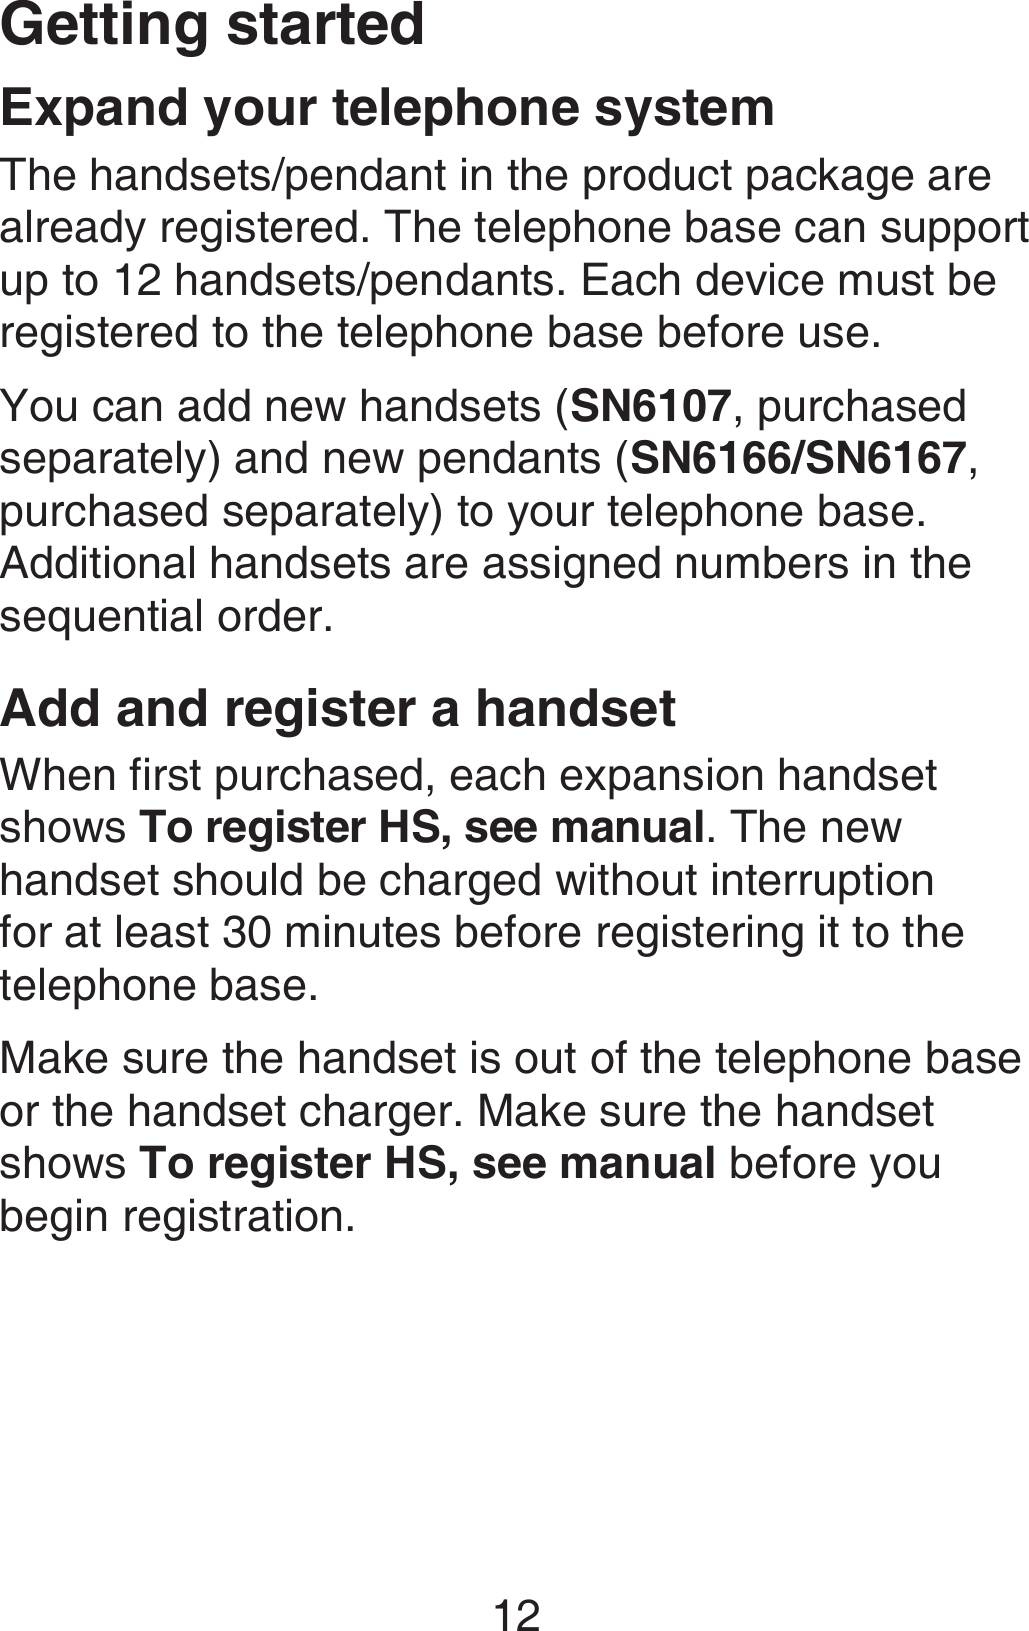 Getting started12The handsets/pendant in the product package are already registered. The telephone base can support up to 12 handsets/pendants. Each device must be registered to the telephone base before use.You can add new handsets (SN6107, purchased separately) and new pendants (SN6166/SN6167, purchased separately) to your telephone base. Additional handsets are assigned numbers in the sequential order.Add and register a handsetWhen first purchased, each expansion handset shows To register HS, see manual. The new handset should be charged without interruption for at least 30 minutes before registering it to the telephone base.Make sure the handset is out of the telephone base or the handset charger. Make sure the handset shows To register HS, see manual before you begin registration.Expand your telephone system